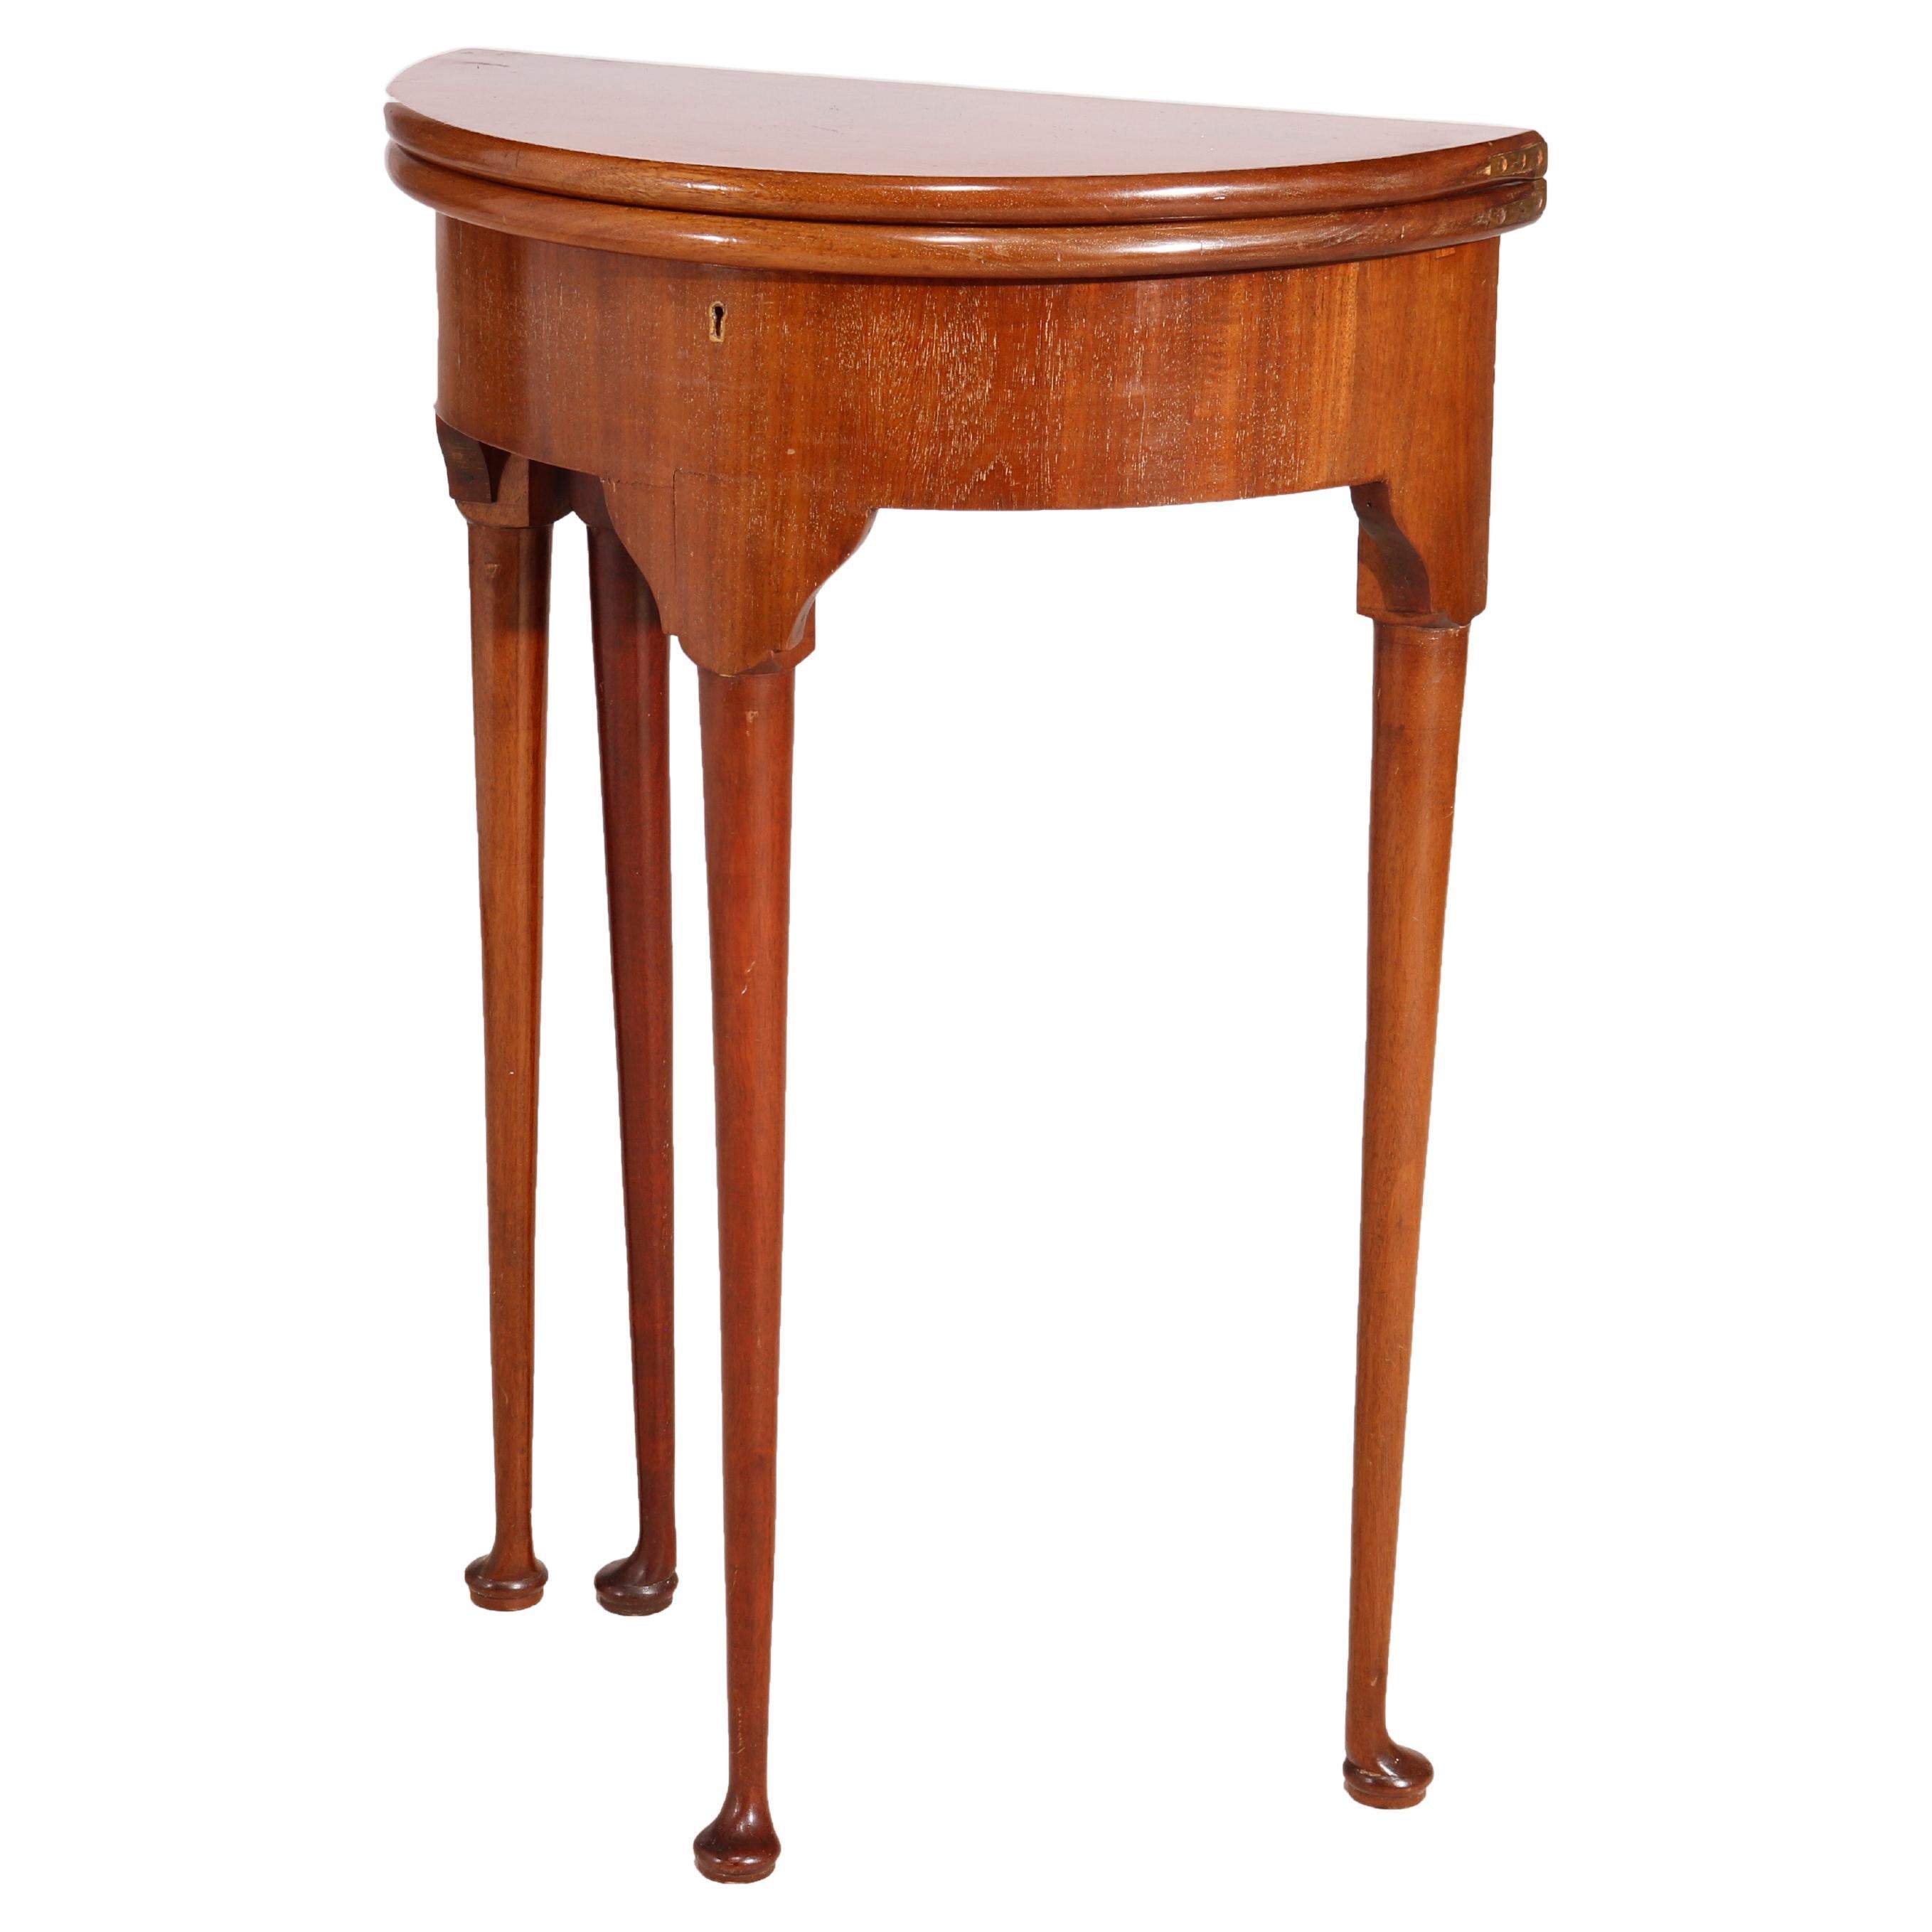 English Queen Anne Mahogany Demilune Lift Top Table, 20th Century For Sale